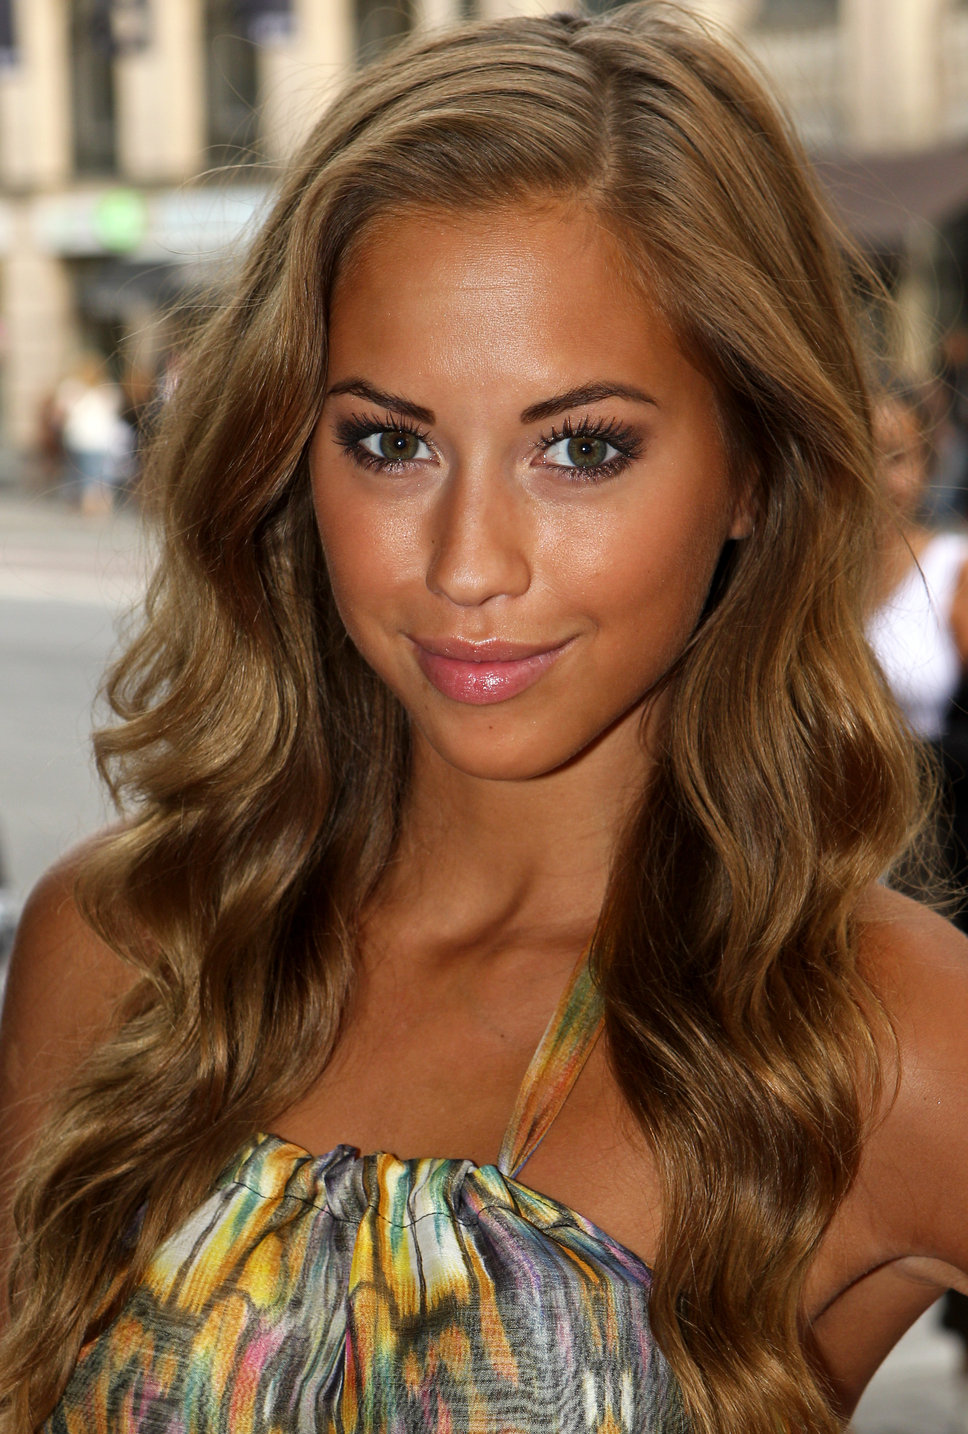 Spiksplinternieuw My mind and style on your screen: Caramel colored hair RS-98